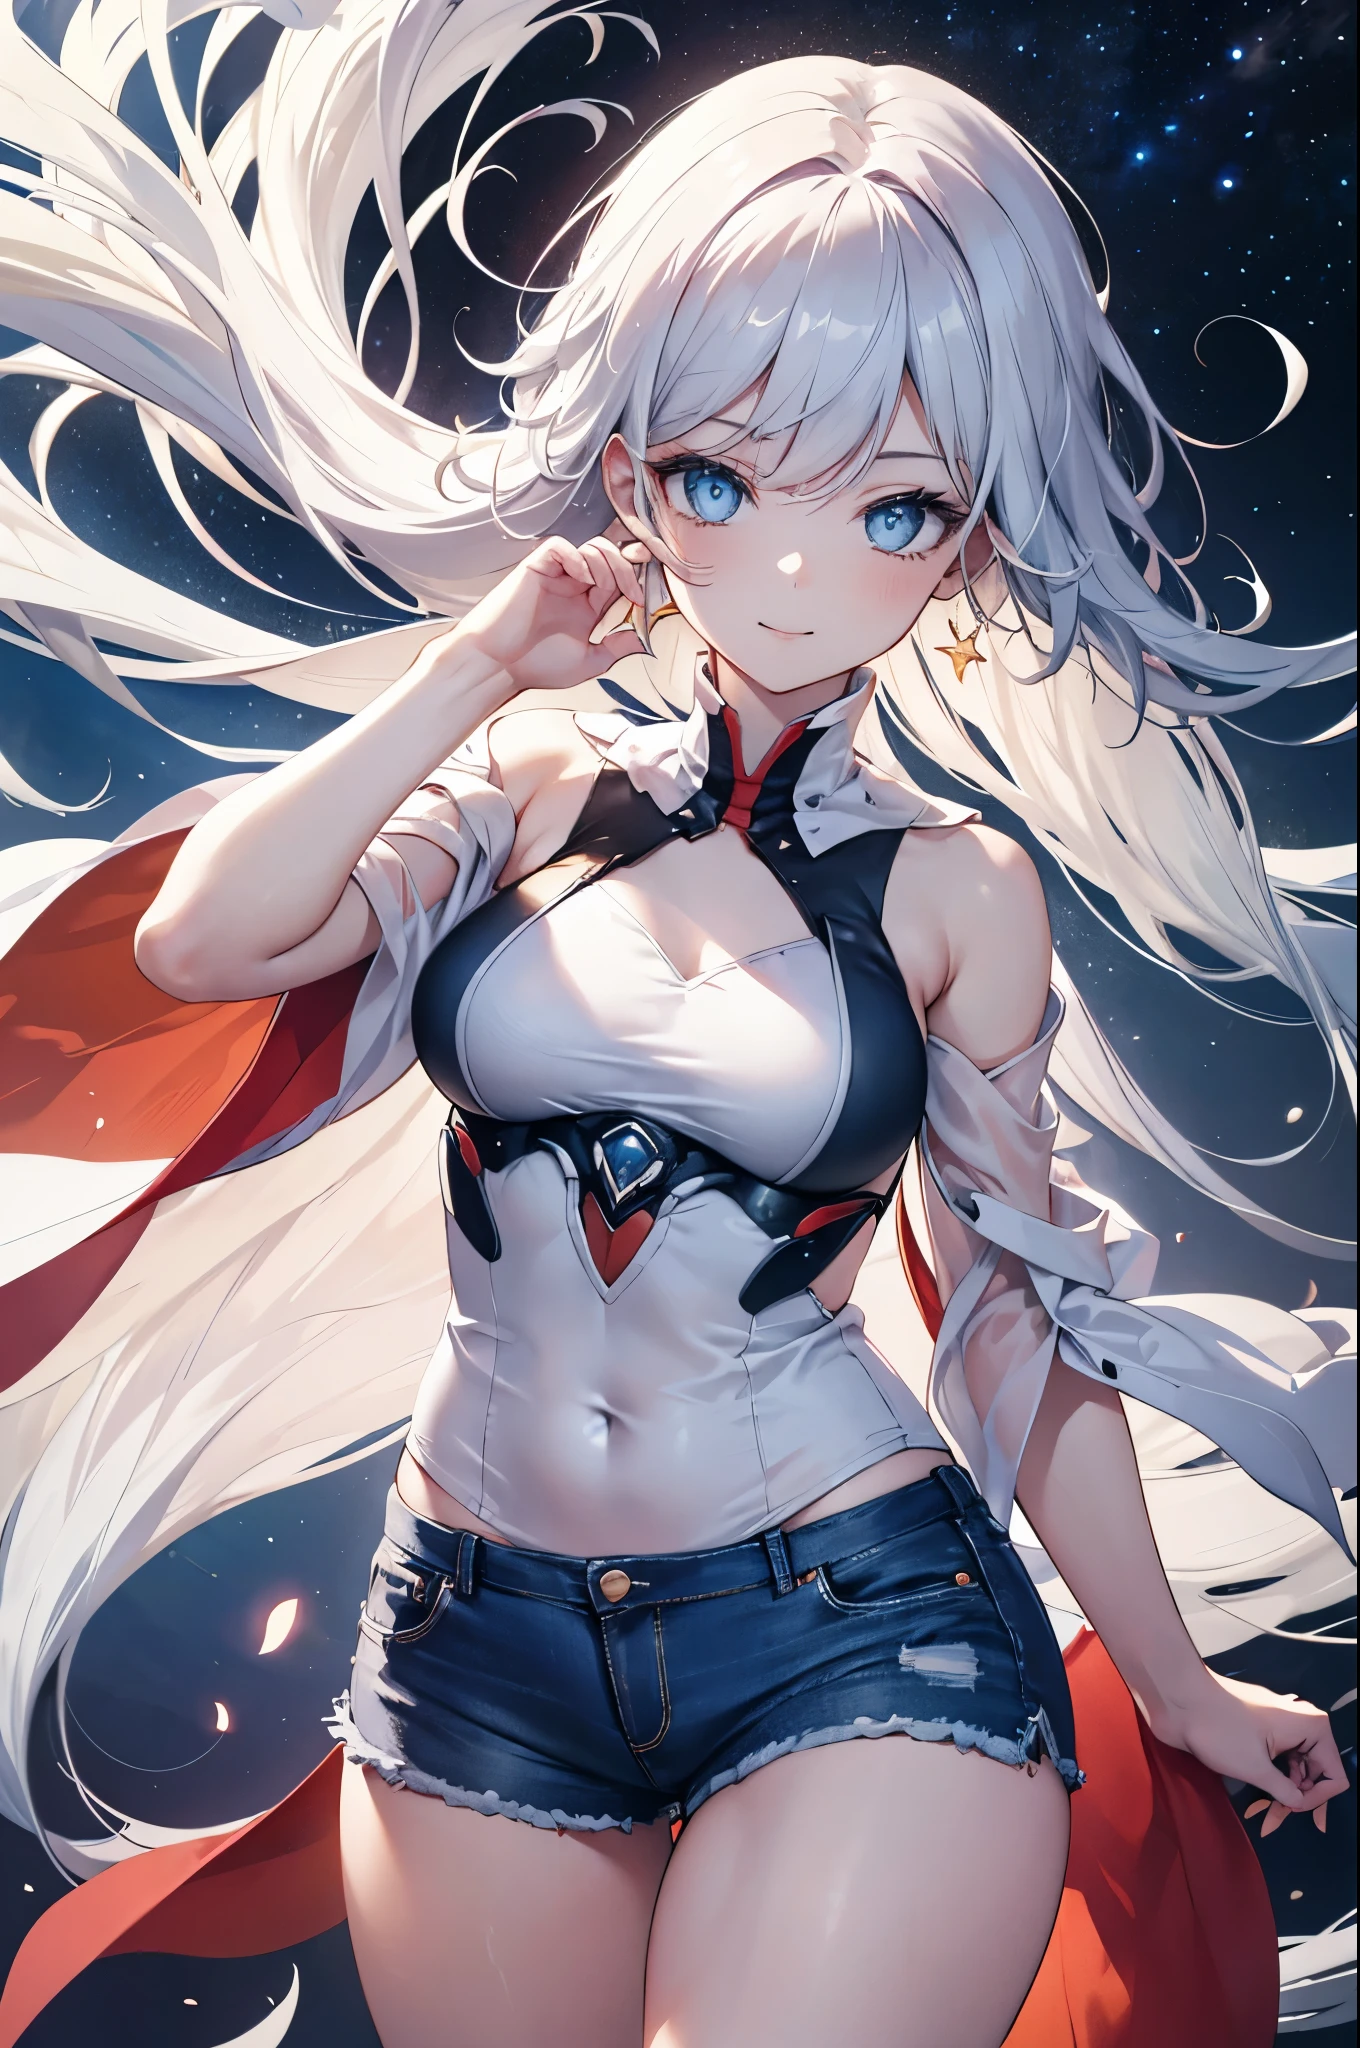 realistic image, coherent image, detailed image, 1 beautiful girl. She has silver hair, long hair. Blue eyes, long eyelashes. Her face is oval and delicate. Smiling. She is wearing a small sleeveless shirt, jean shorts. She has a curvy body, medium breasts, thick thighs. she pose sexy. Background of the universe, surrounded by stars. natural lighting in front, volumetric lighting